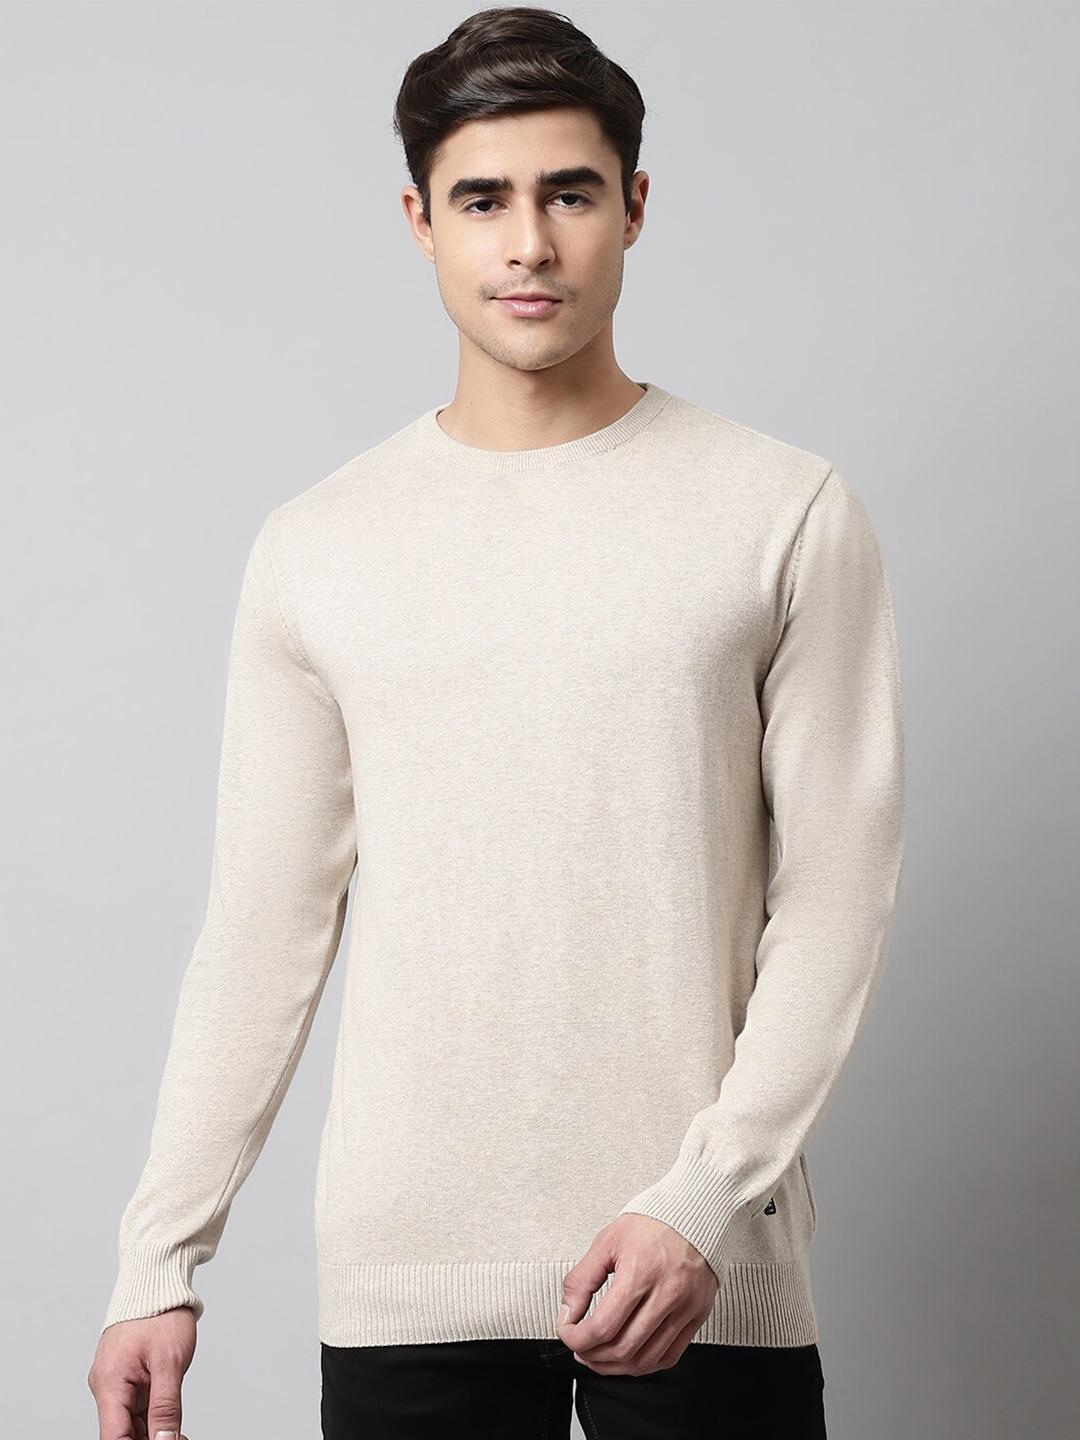 Cantabil Men Round Neck Long Sleeves Wool Pullover